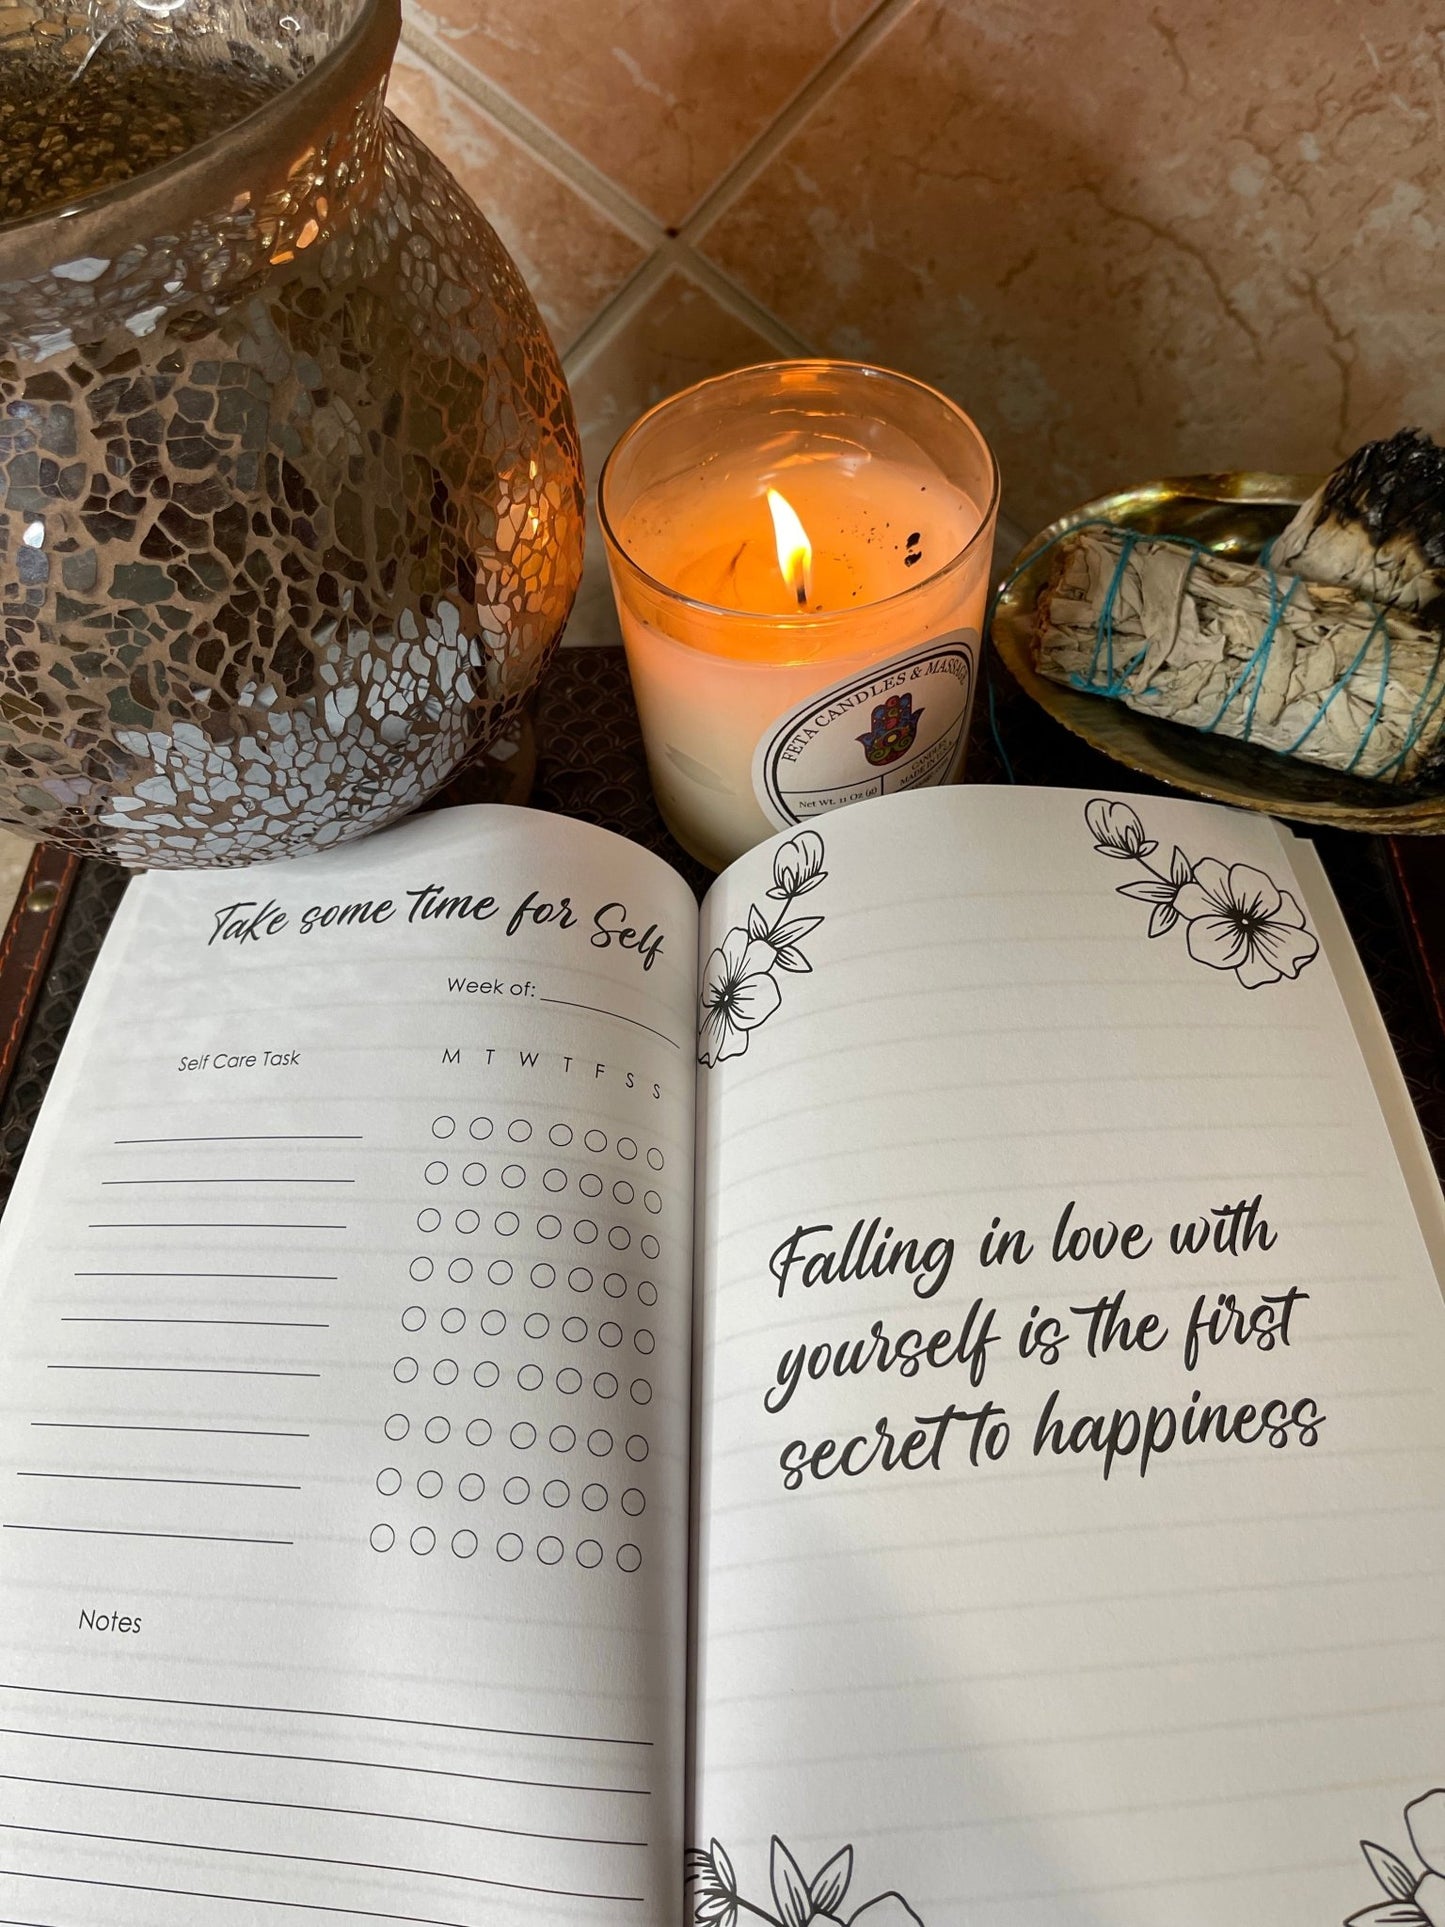 Made With Self Love: Self-Love Accountability Guided Journal - Shawnti Refuge Journals